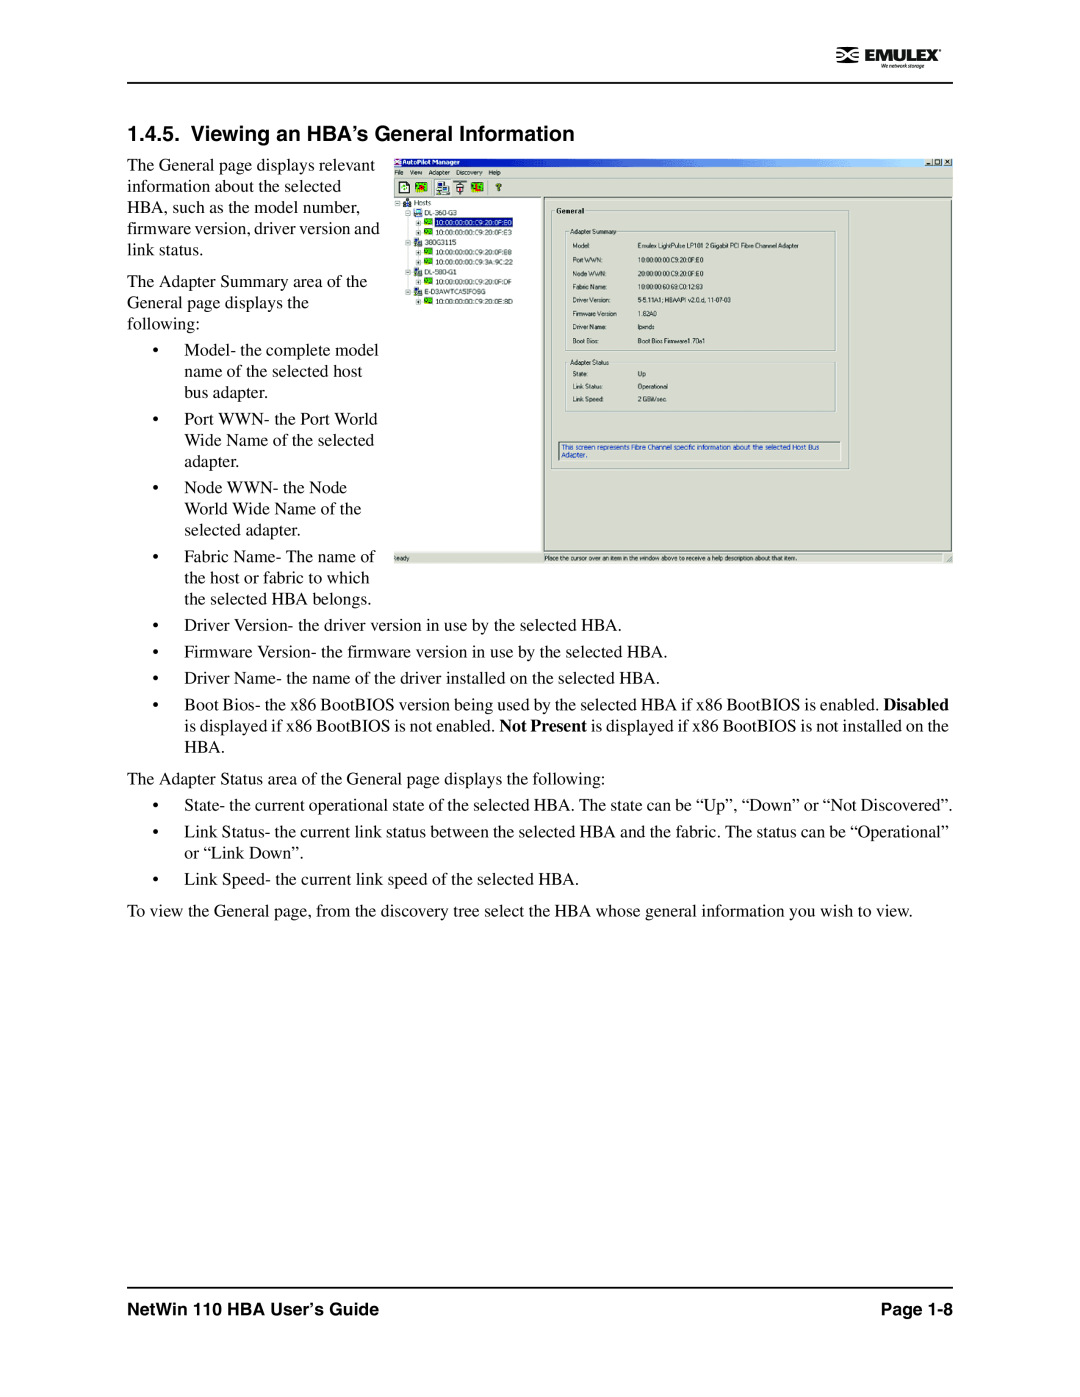 Emulex manual Viewing an HBA’s General Information, NetWin 110 HBA User’s Guide, Page 